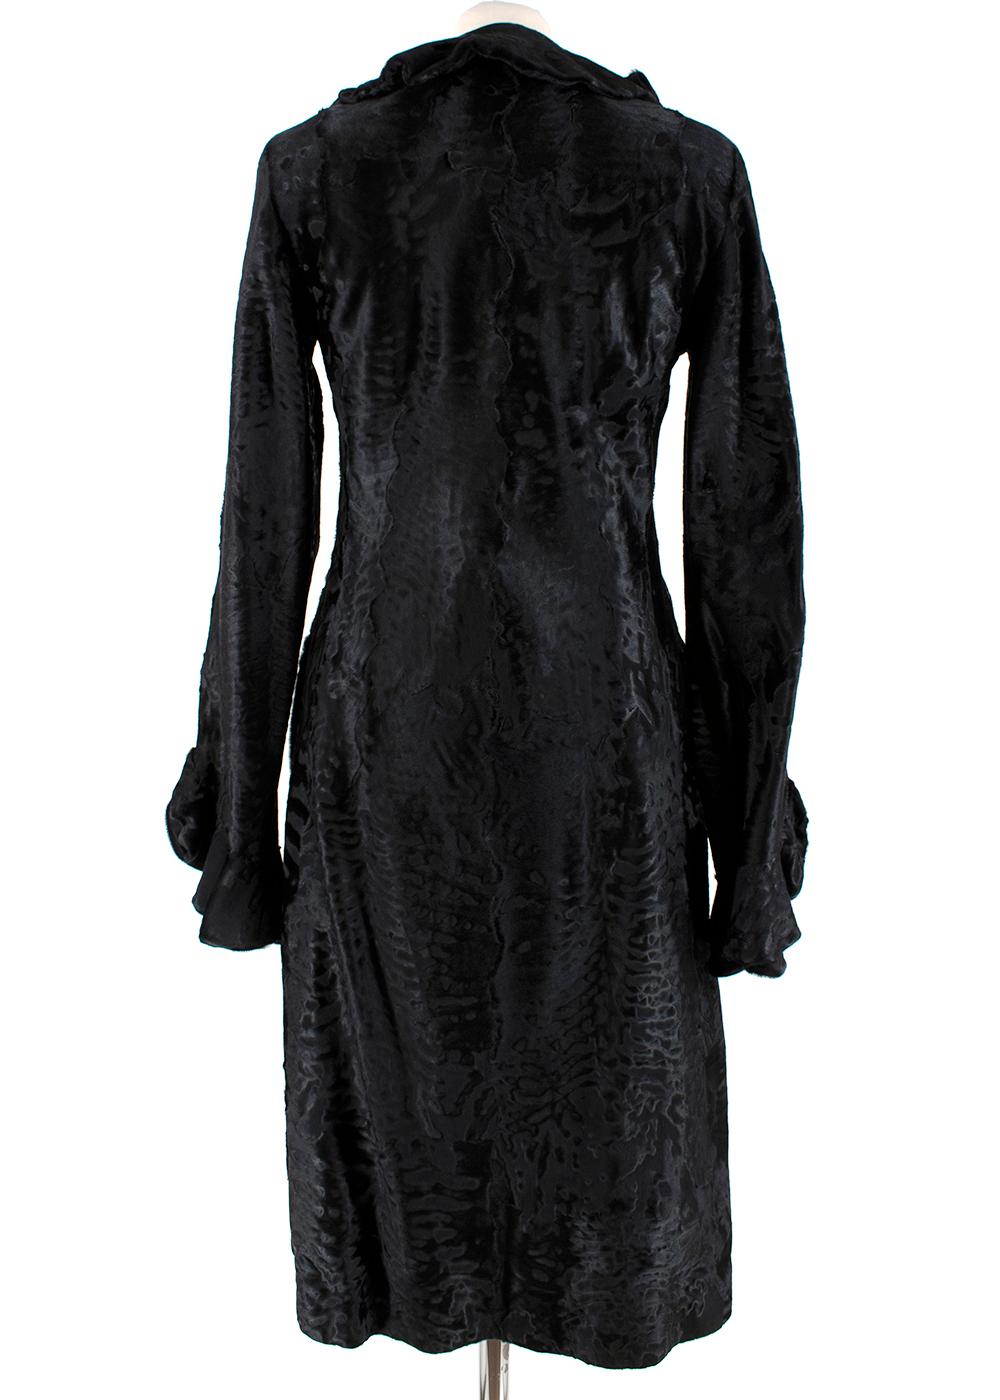 Valentino Black Astrakhan Ruffled Silk Lined Coat - Size Estimated XS In Excellent Condition For Sale In London, GB